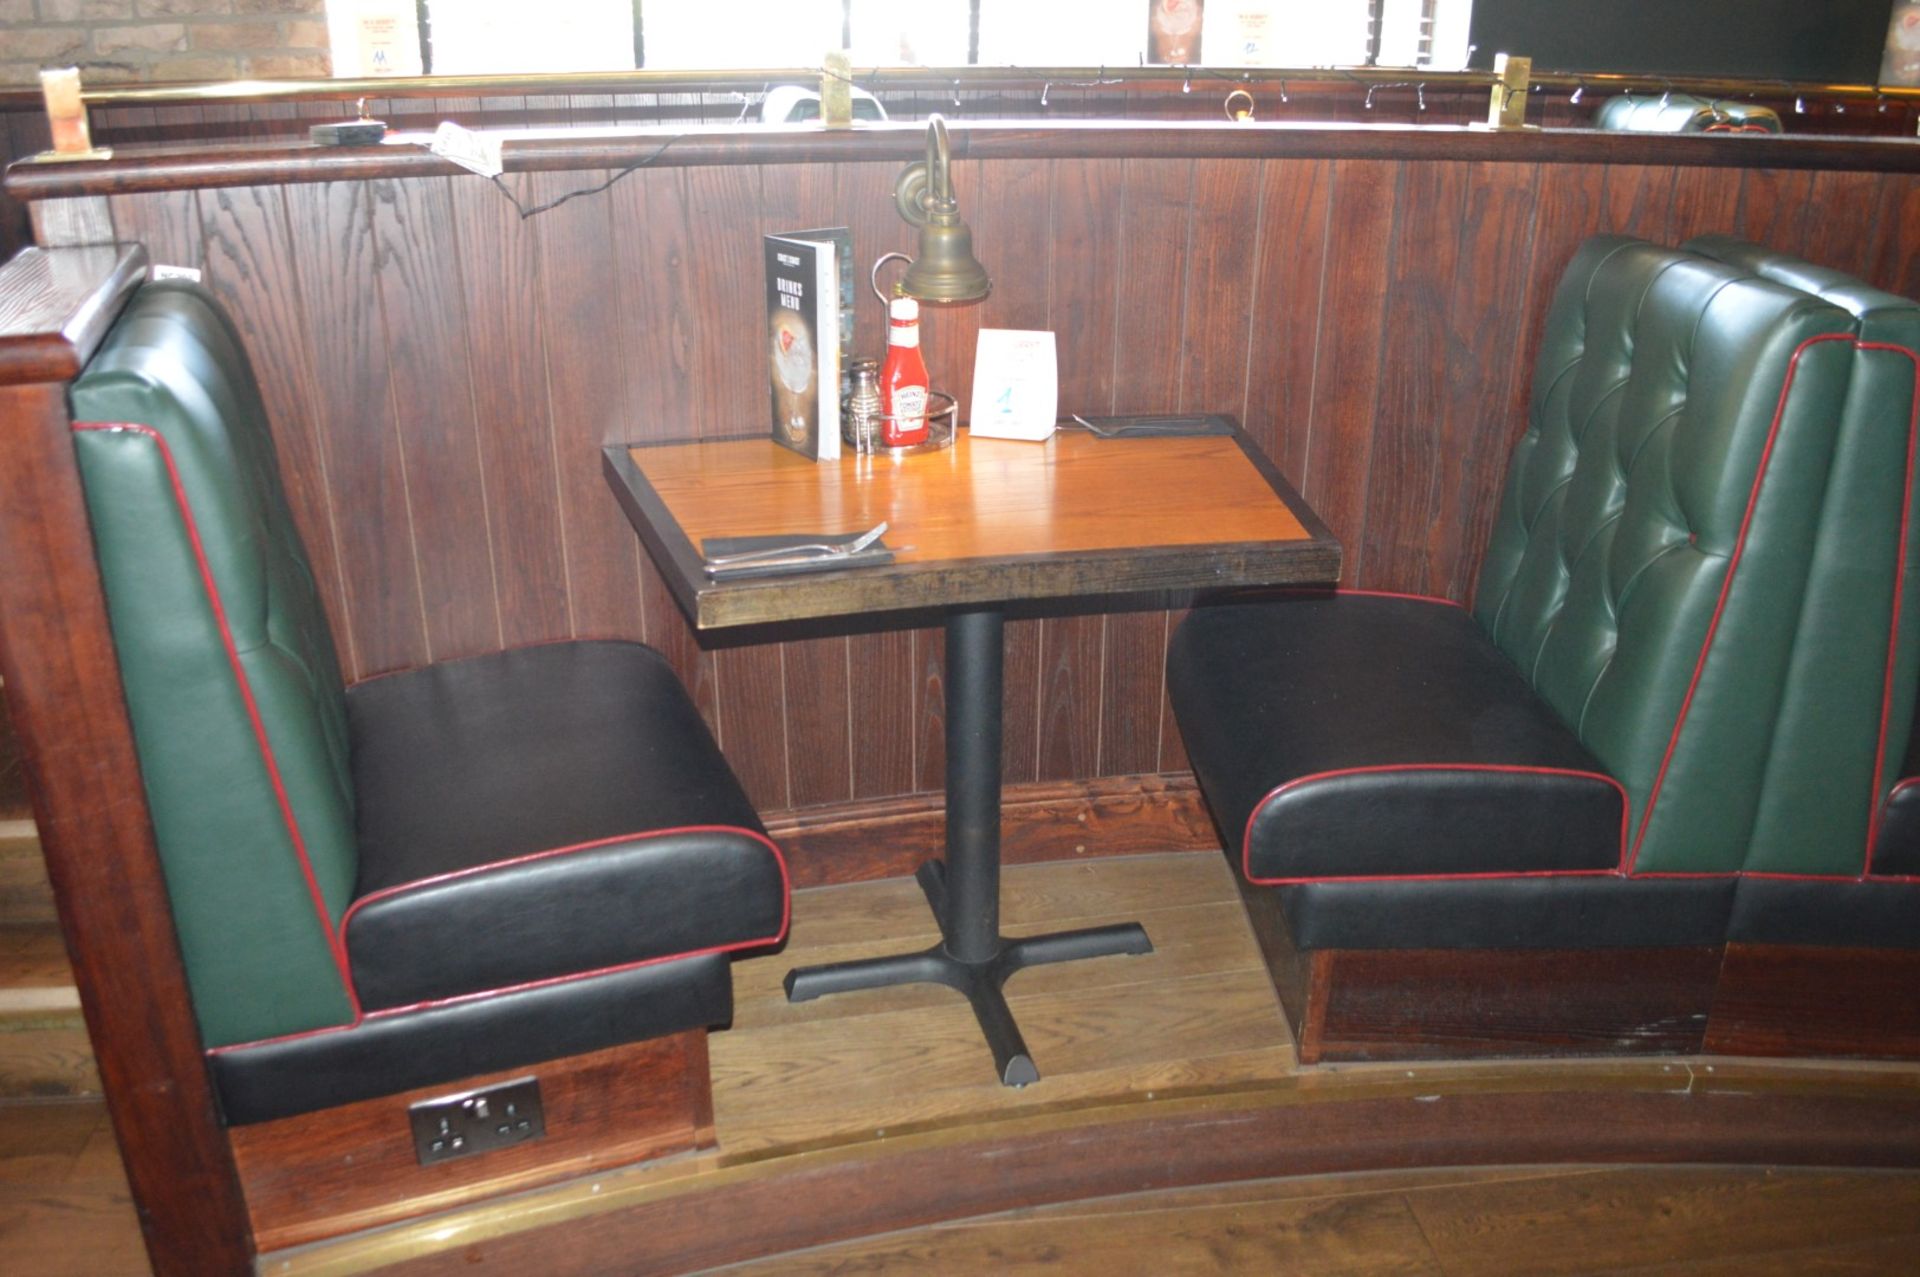 4 x Sections of Restaurant Booth Seating - Include 2 x Single Seats and 2 x Single Back to Back Seat - Image 9 of 12